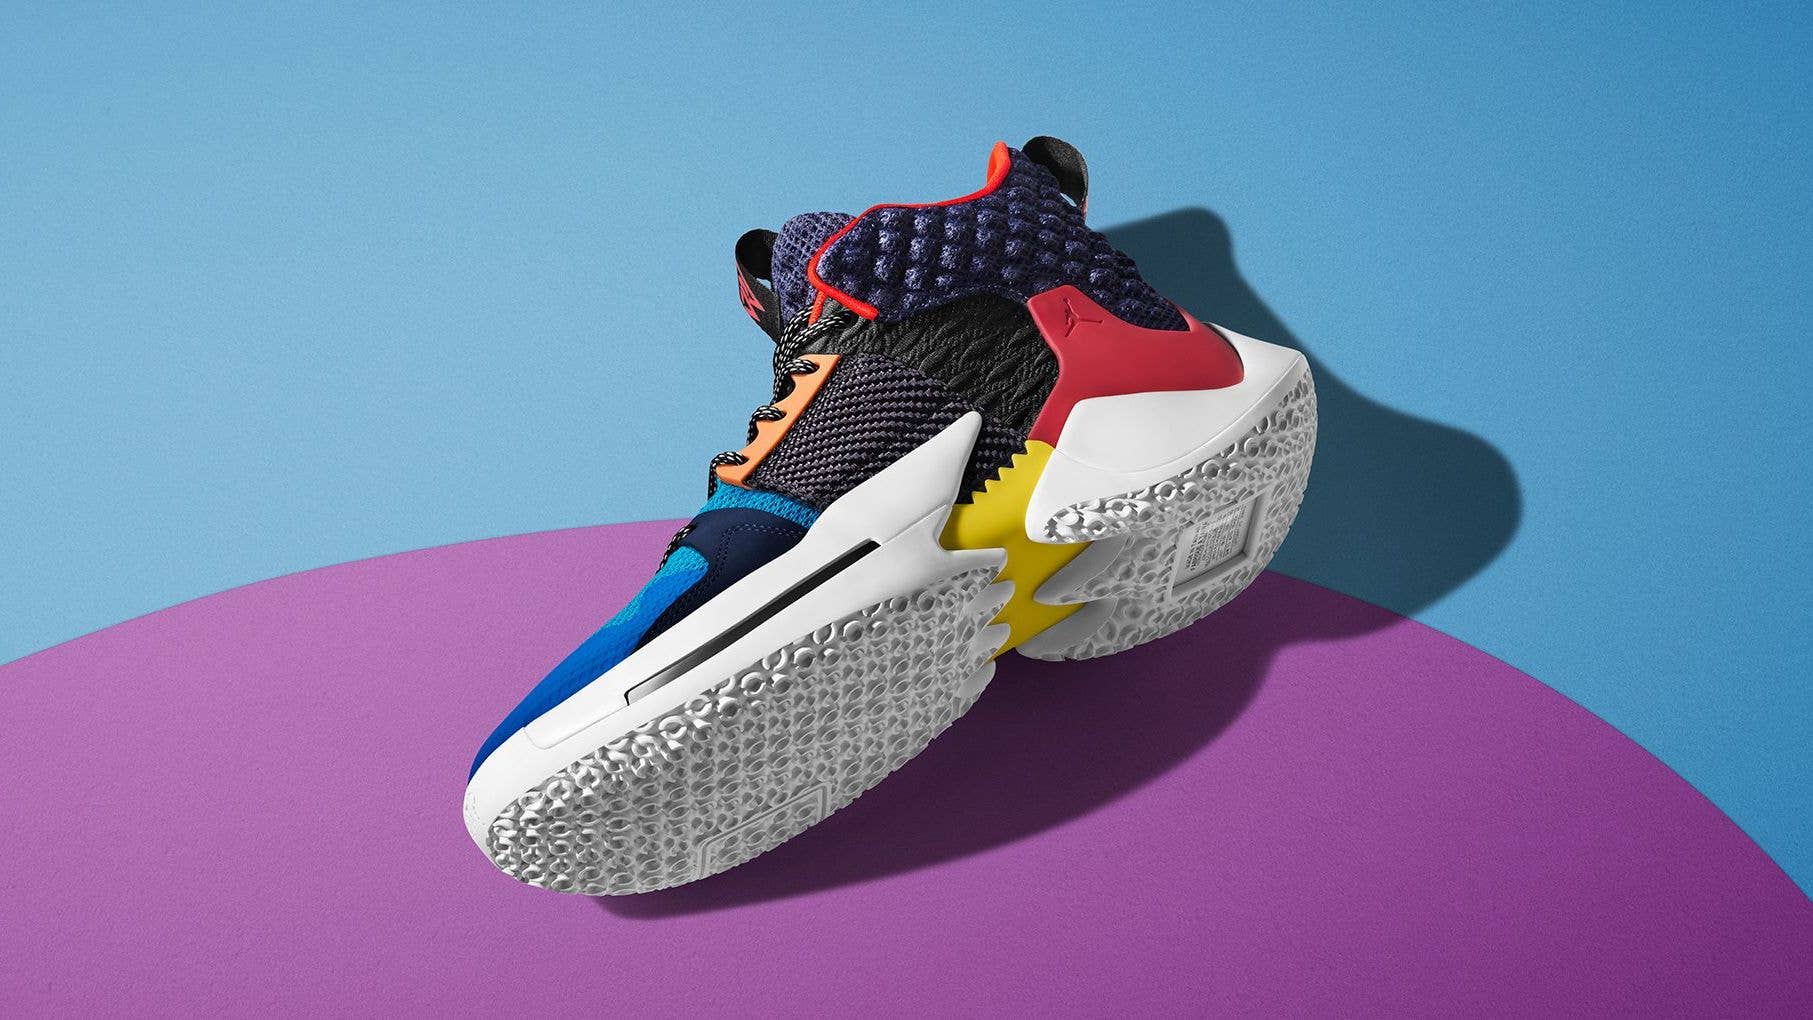 Russell Westbrook Jordan Why Not Zer0.2 Future History